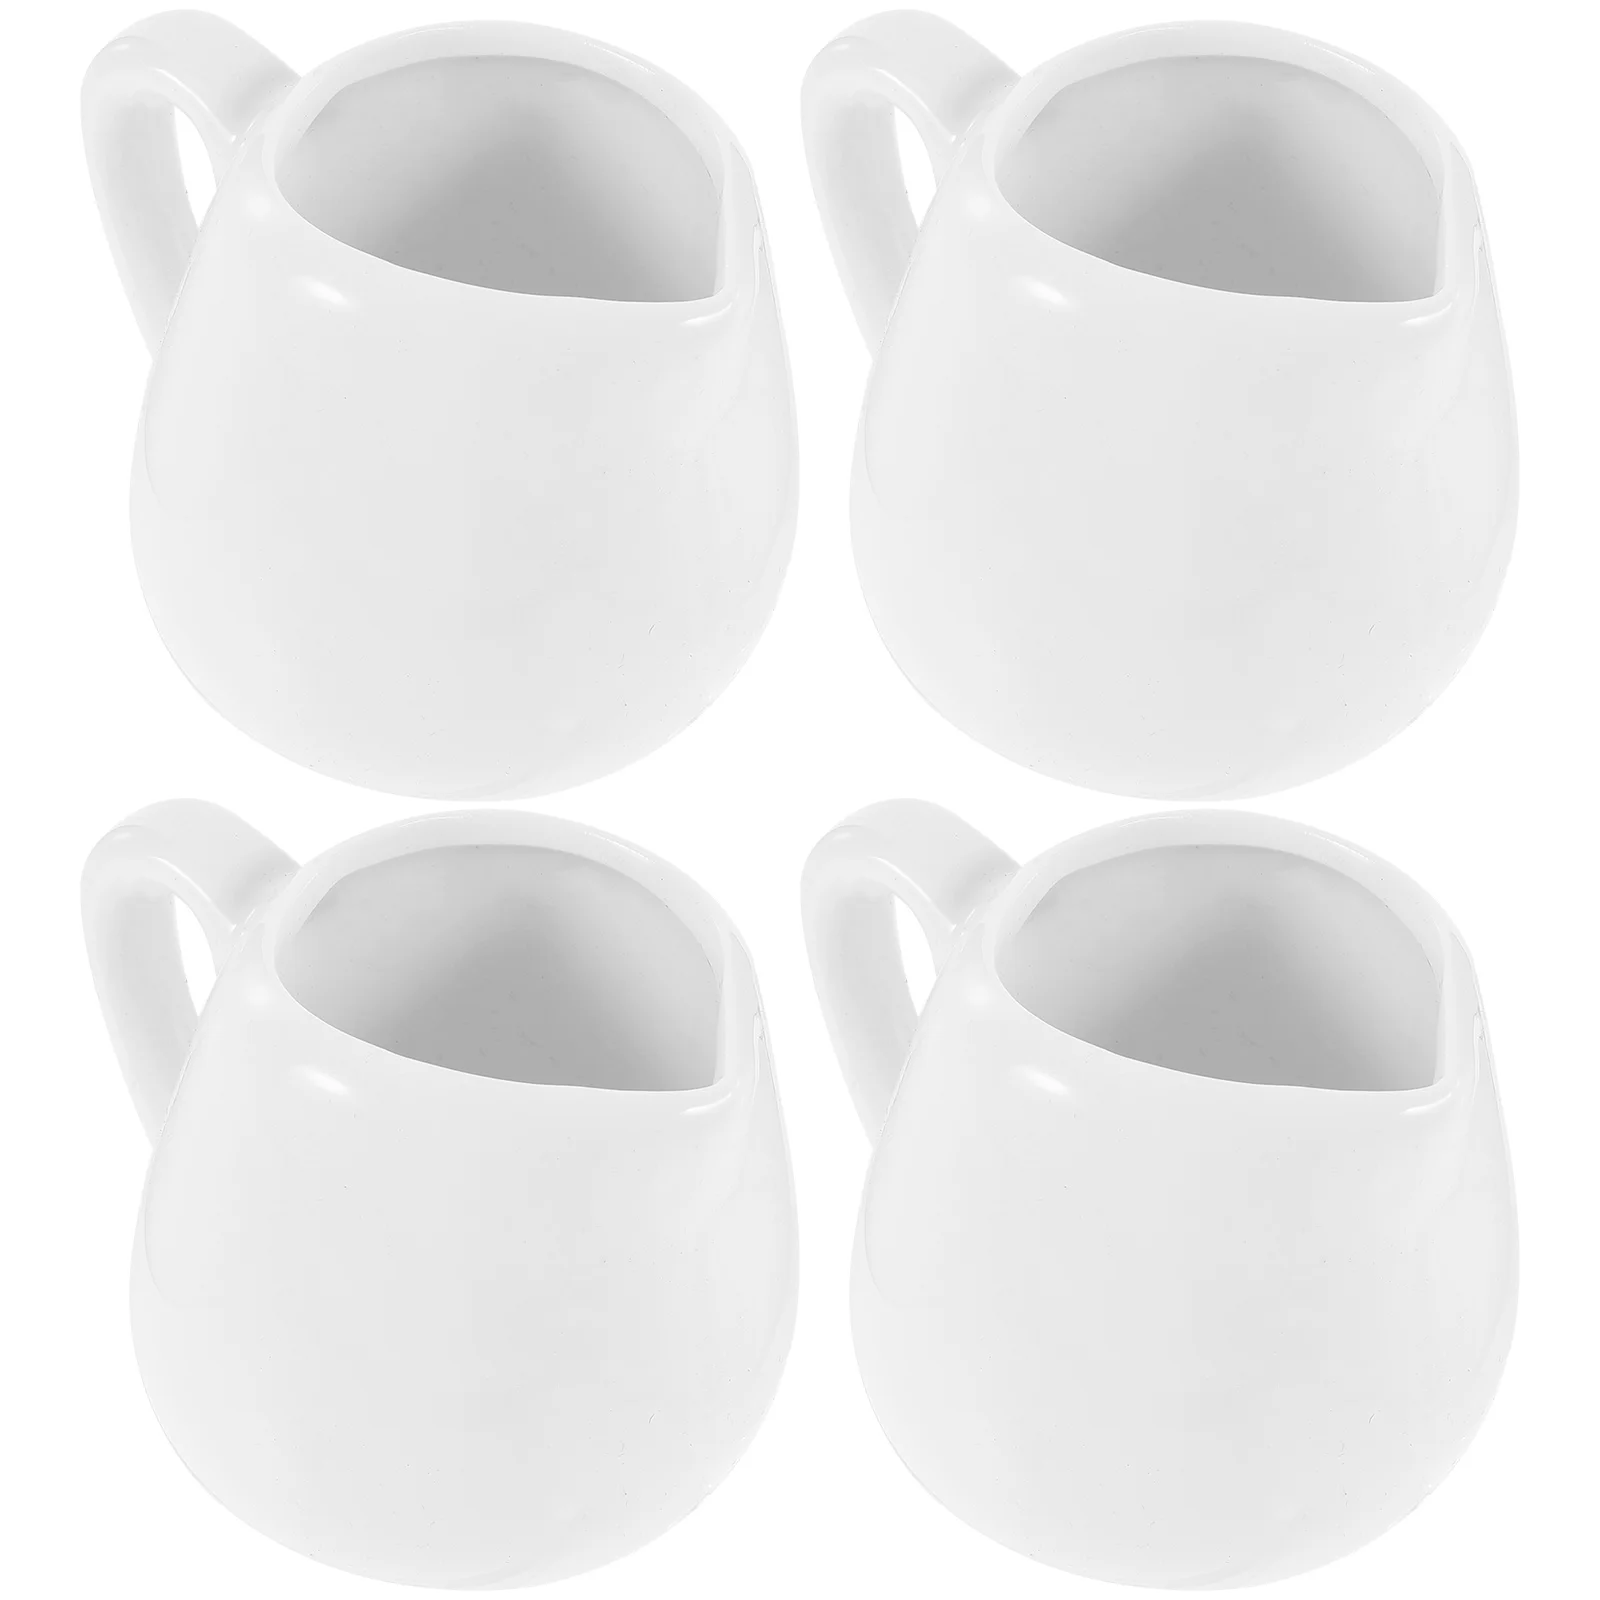 

4 Pcs Milk Jug for Coffee Machine Creamer Holder Ceramic Sauce Without Handle Container Pitcher Syrup Ceramics Dispenser